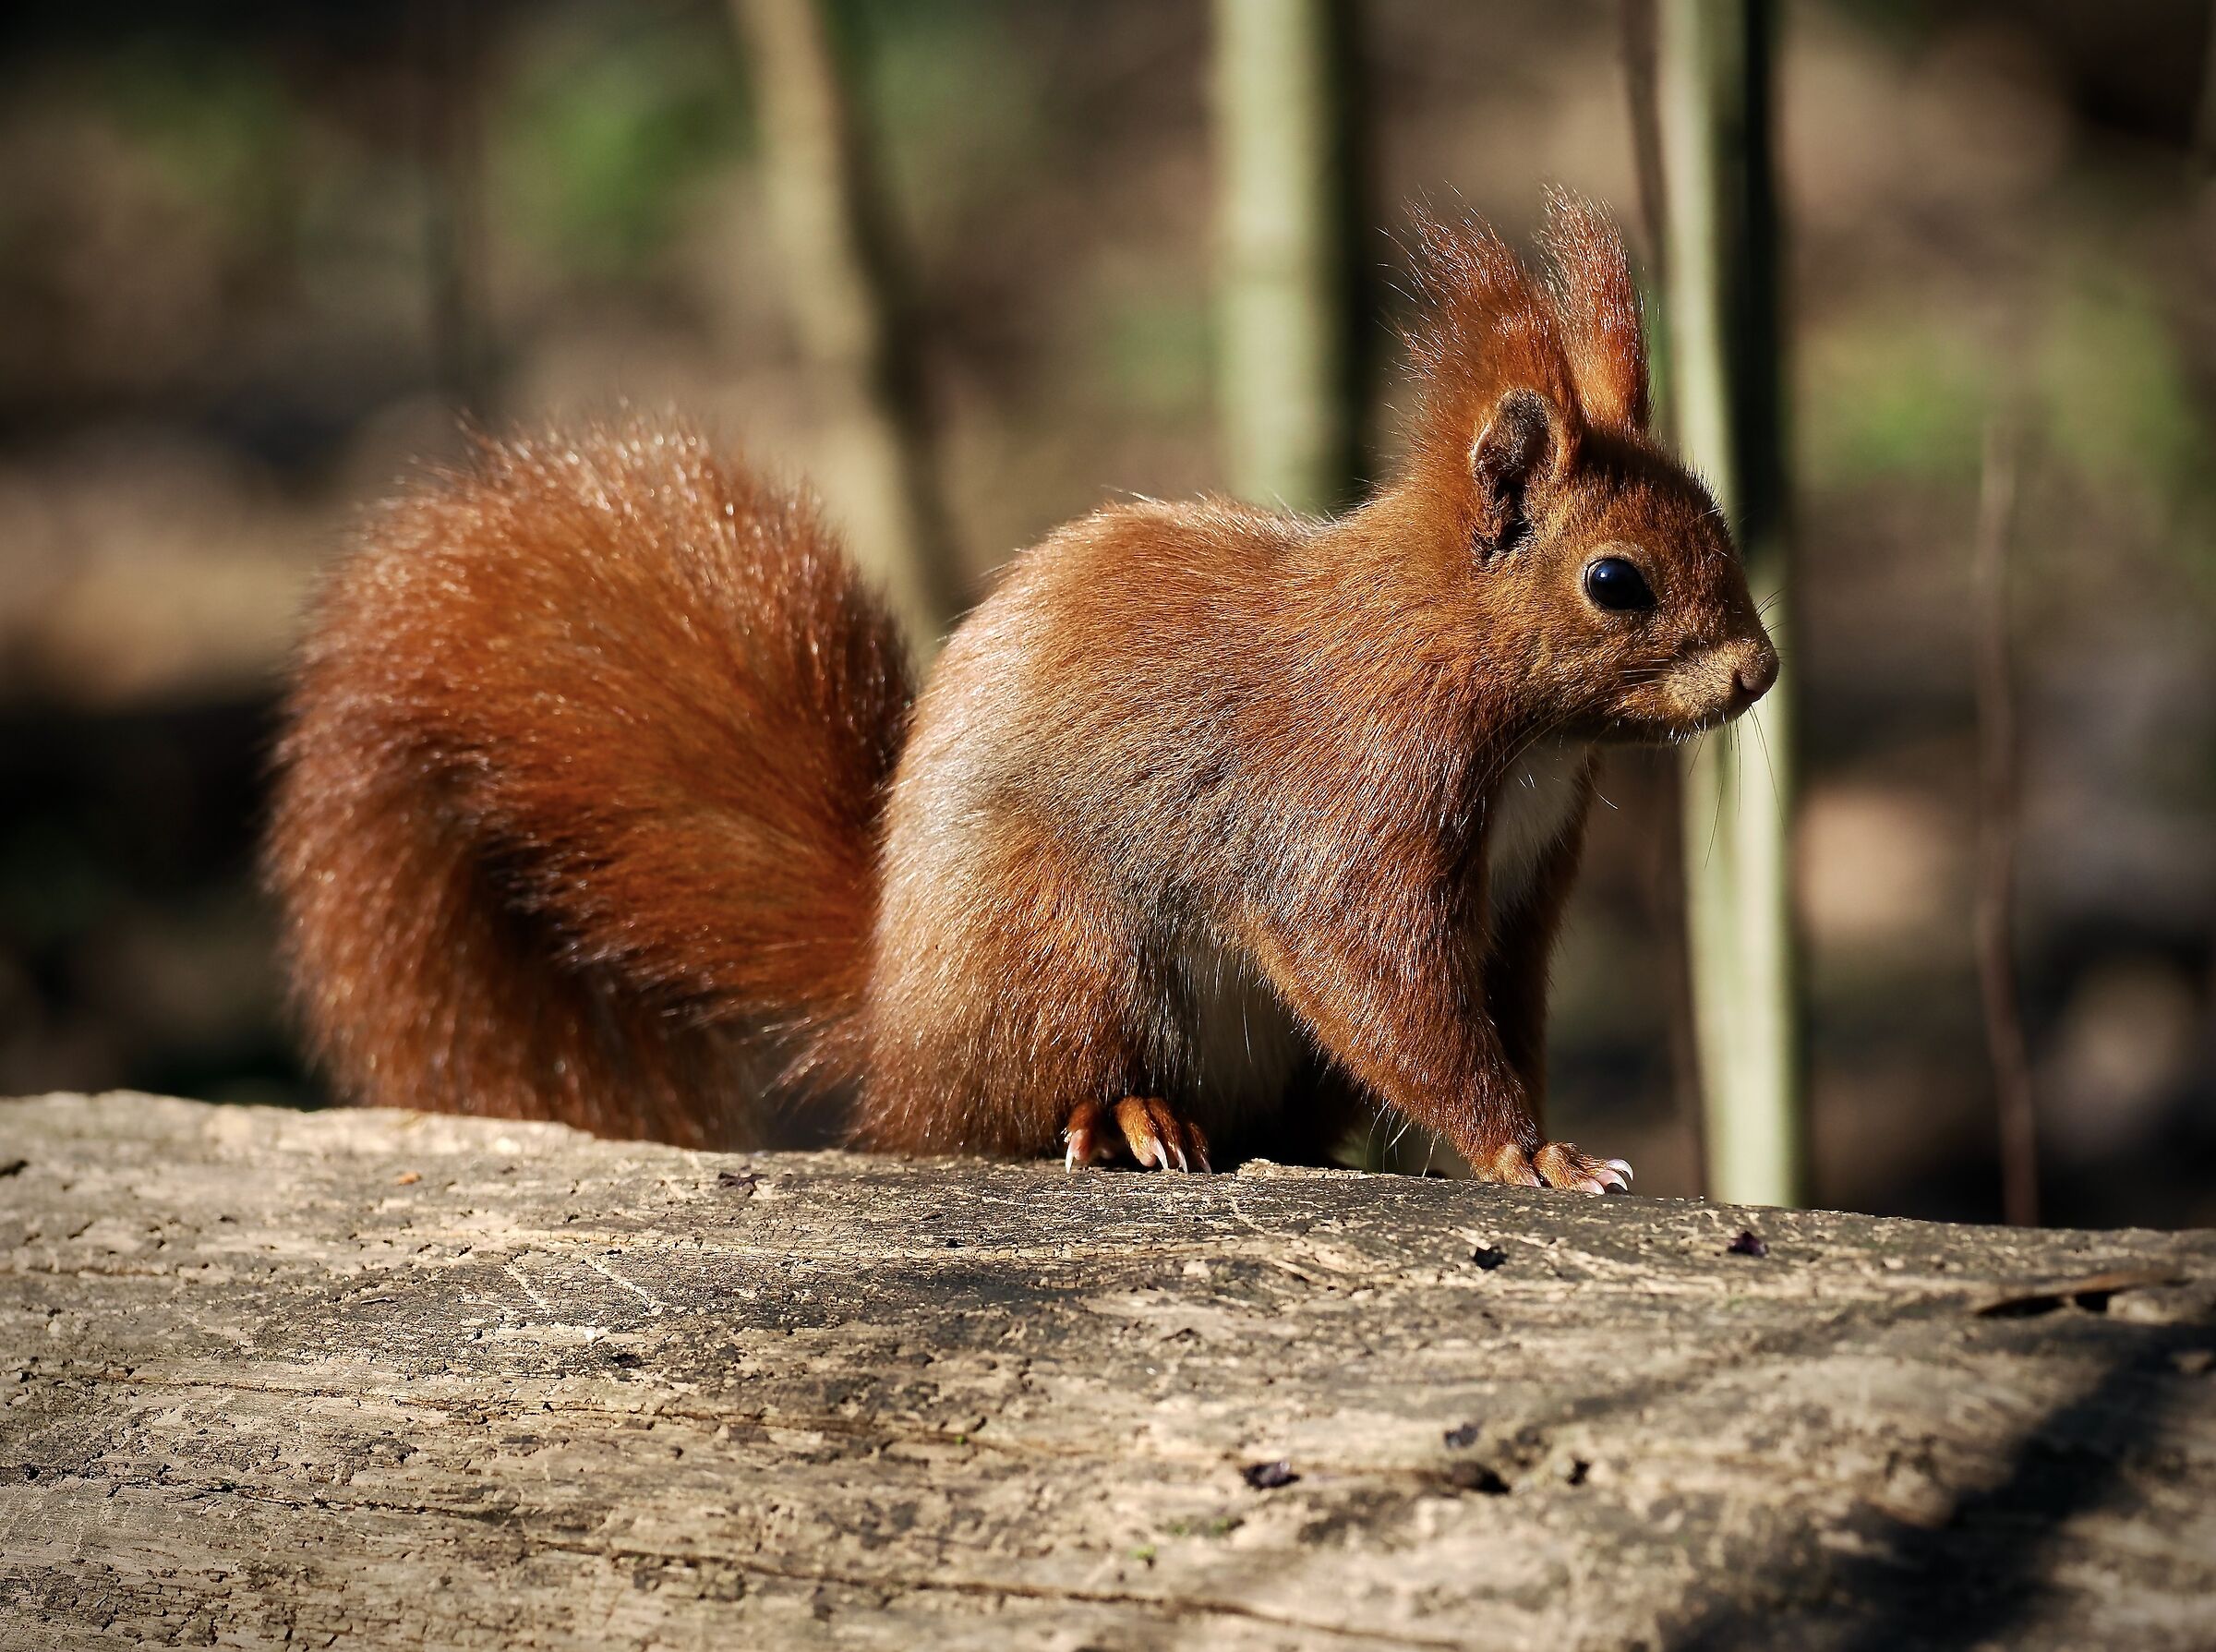 Red squirrel increasingly a rarity...